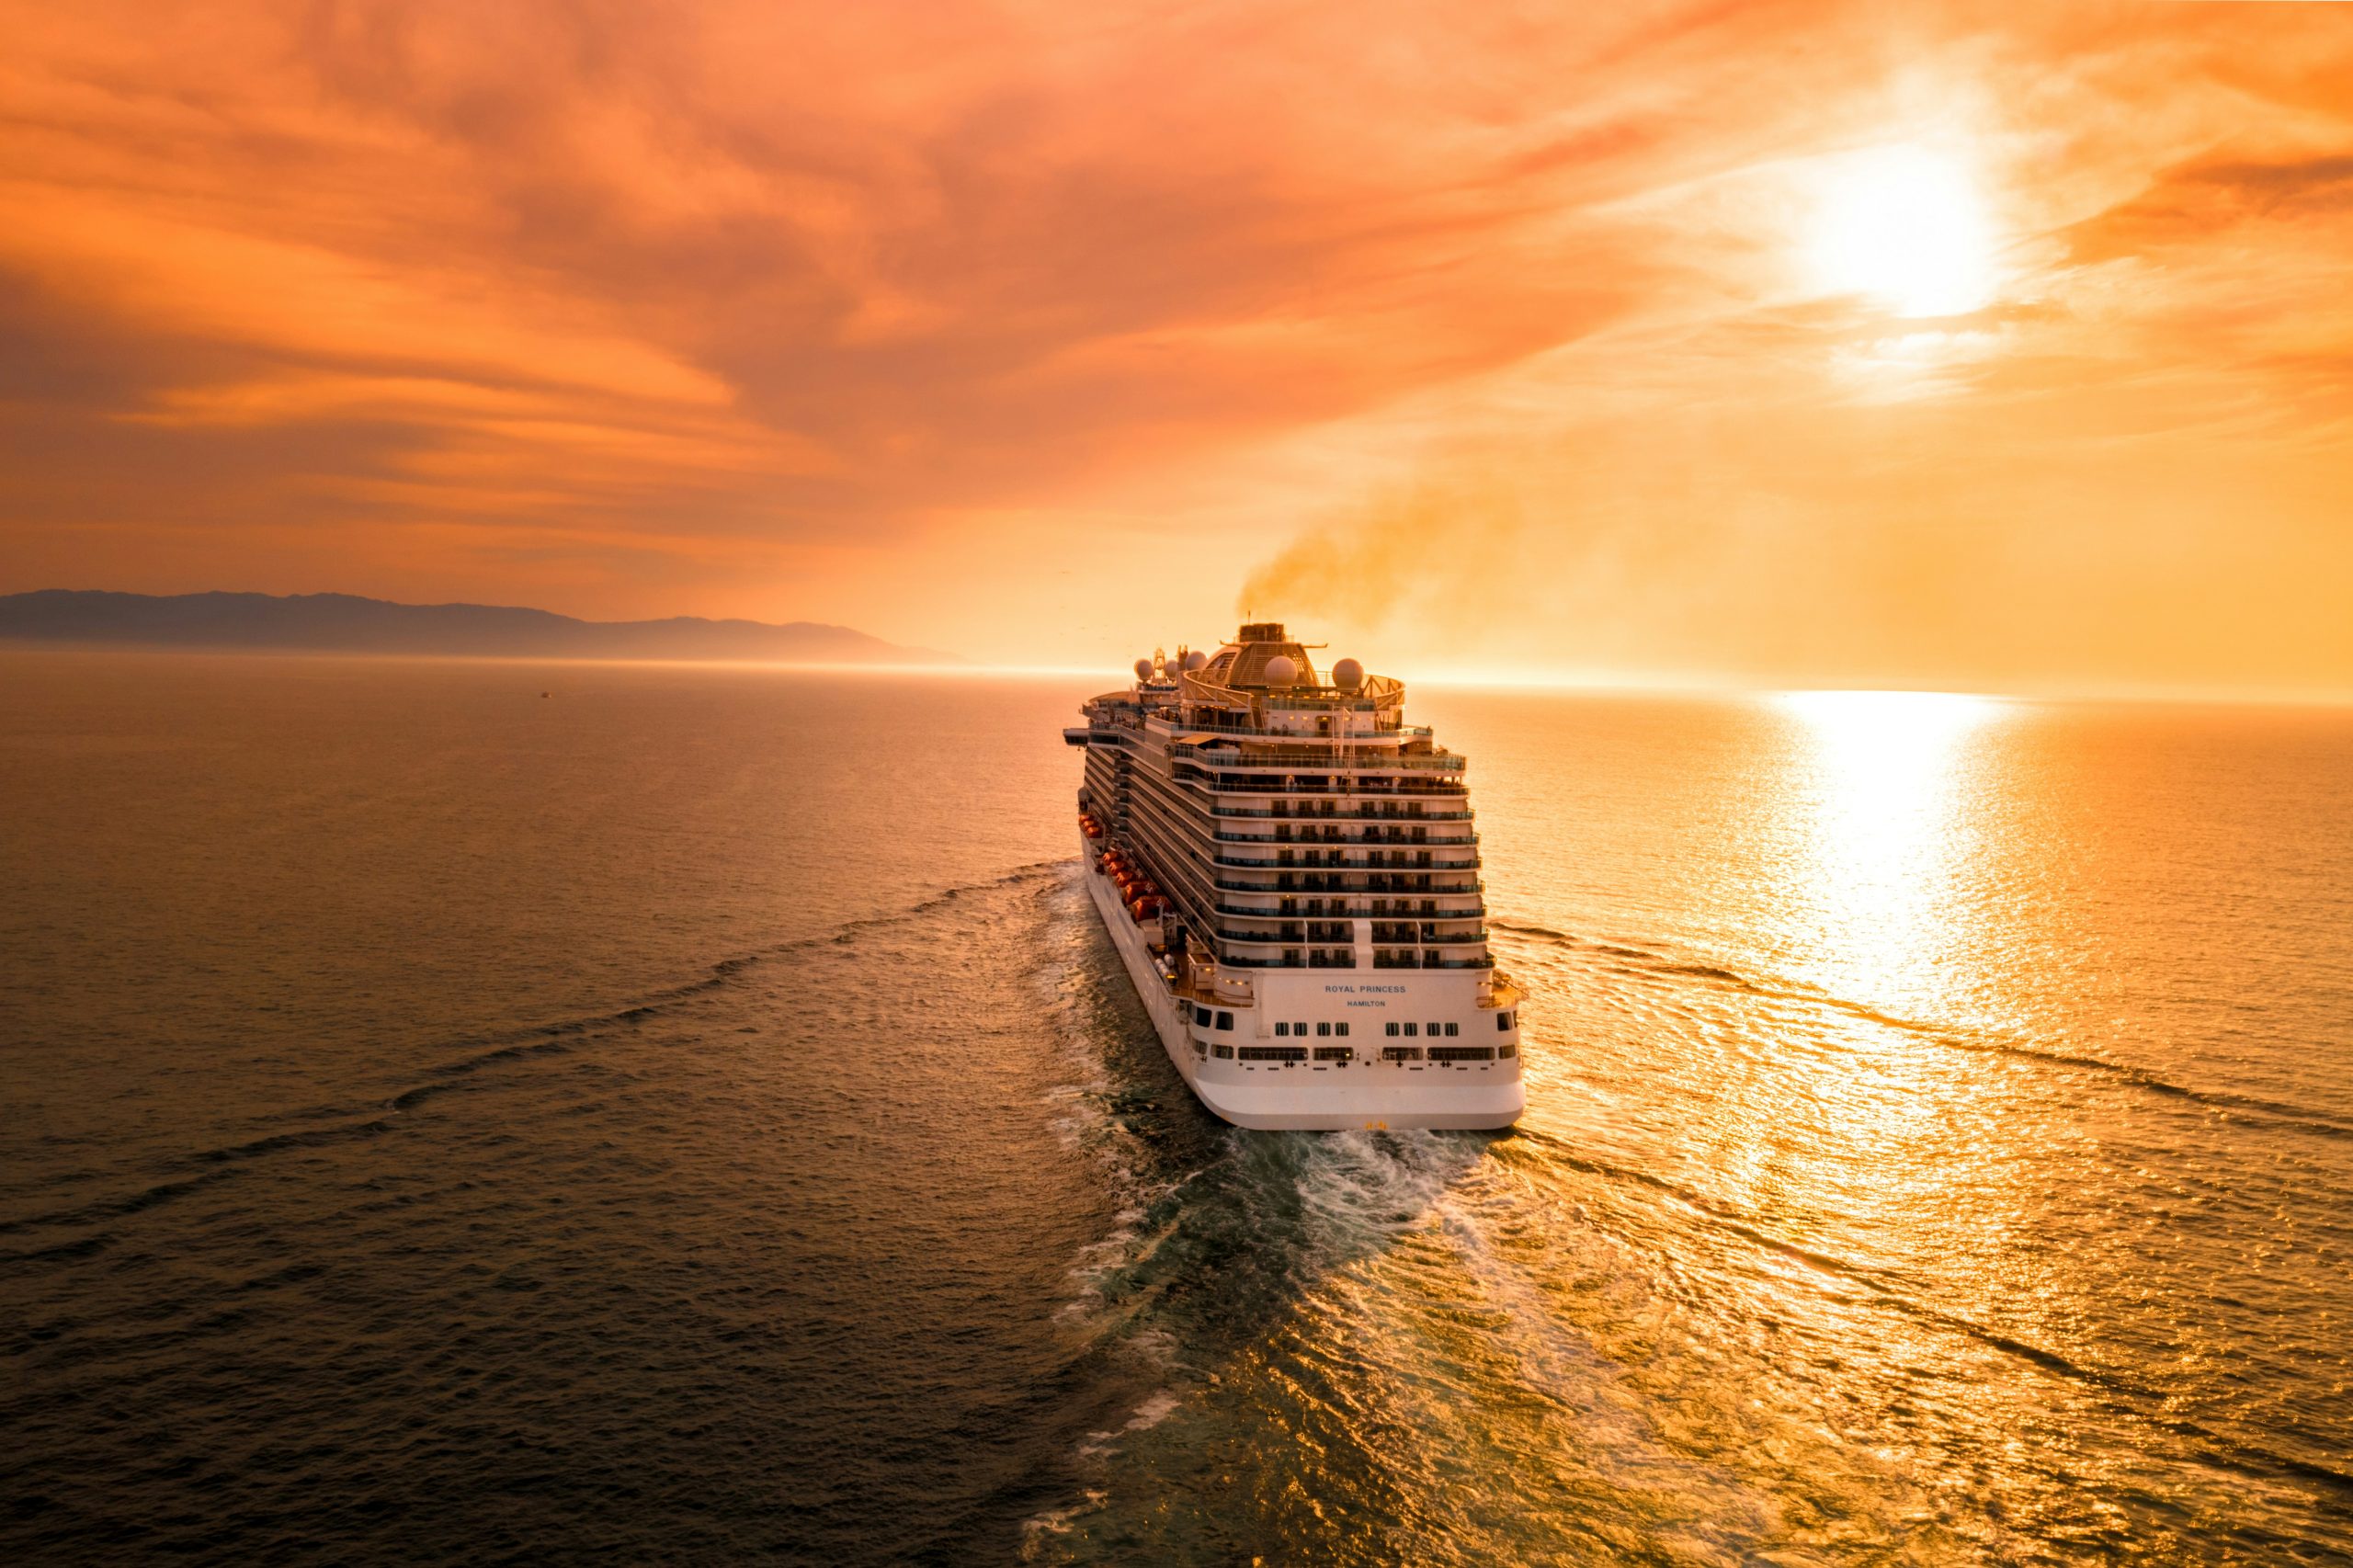 discover the best cruise deals and itineraries for your next vacation. book now and set sail on the adventure of a lifetime!